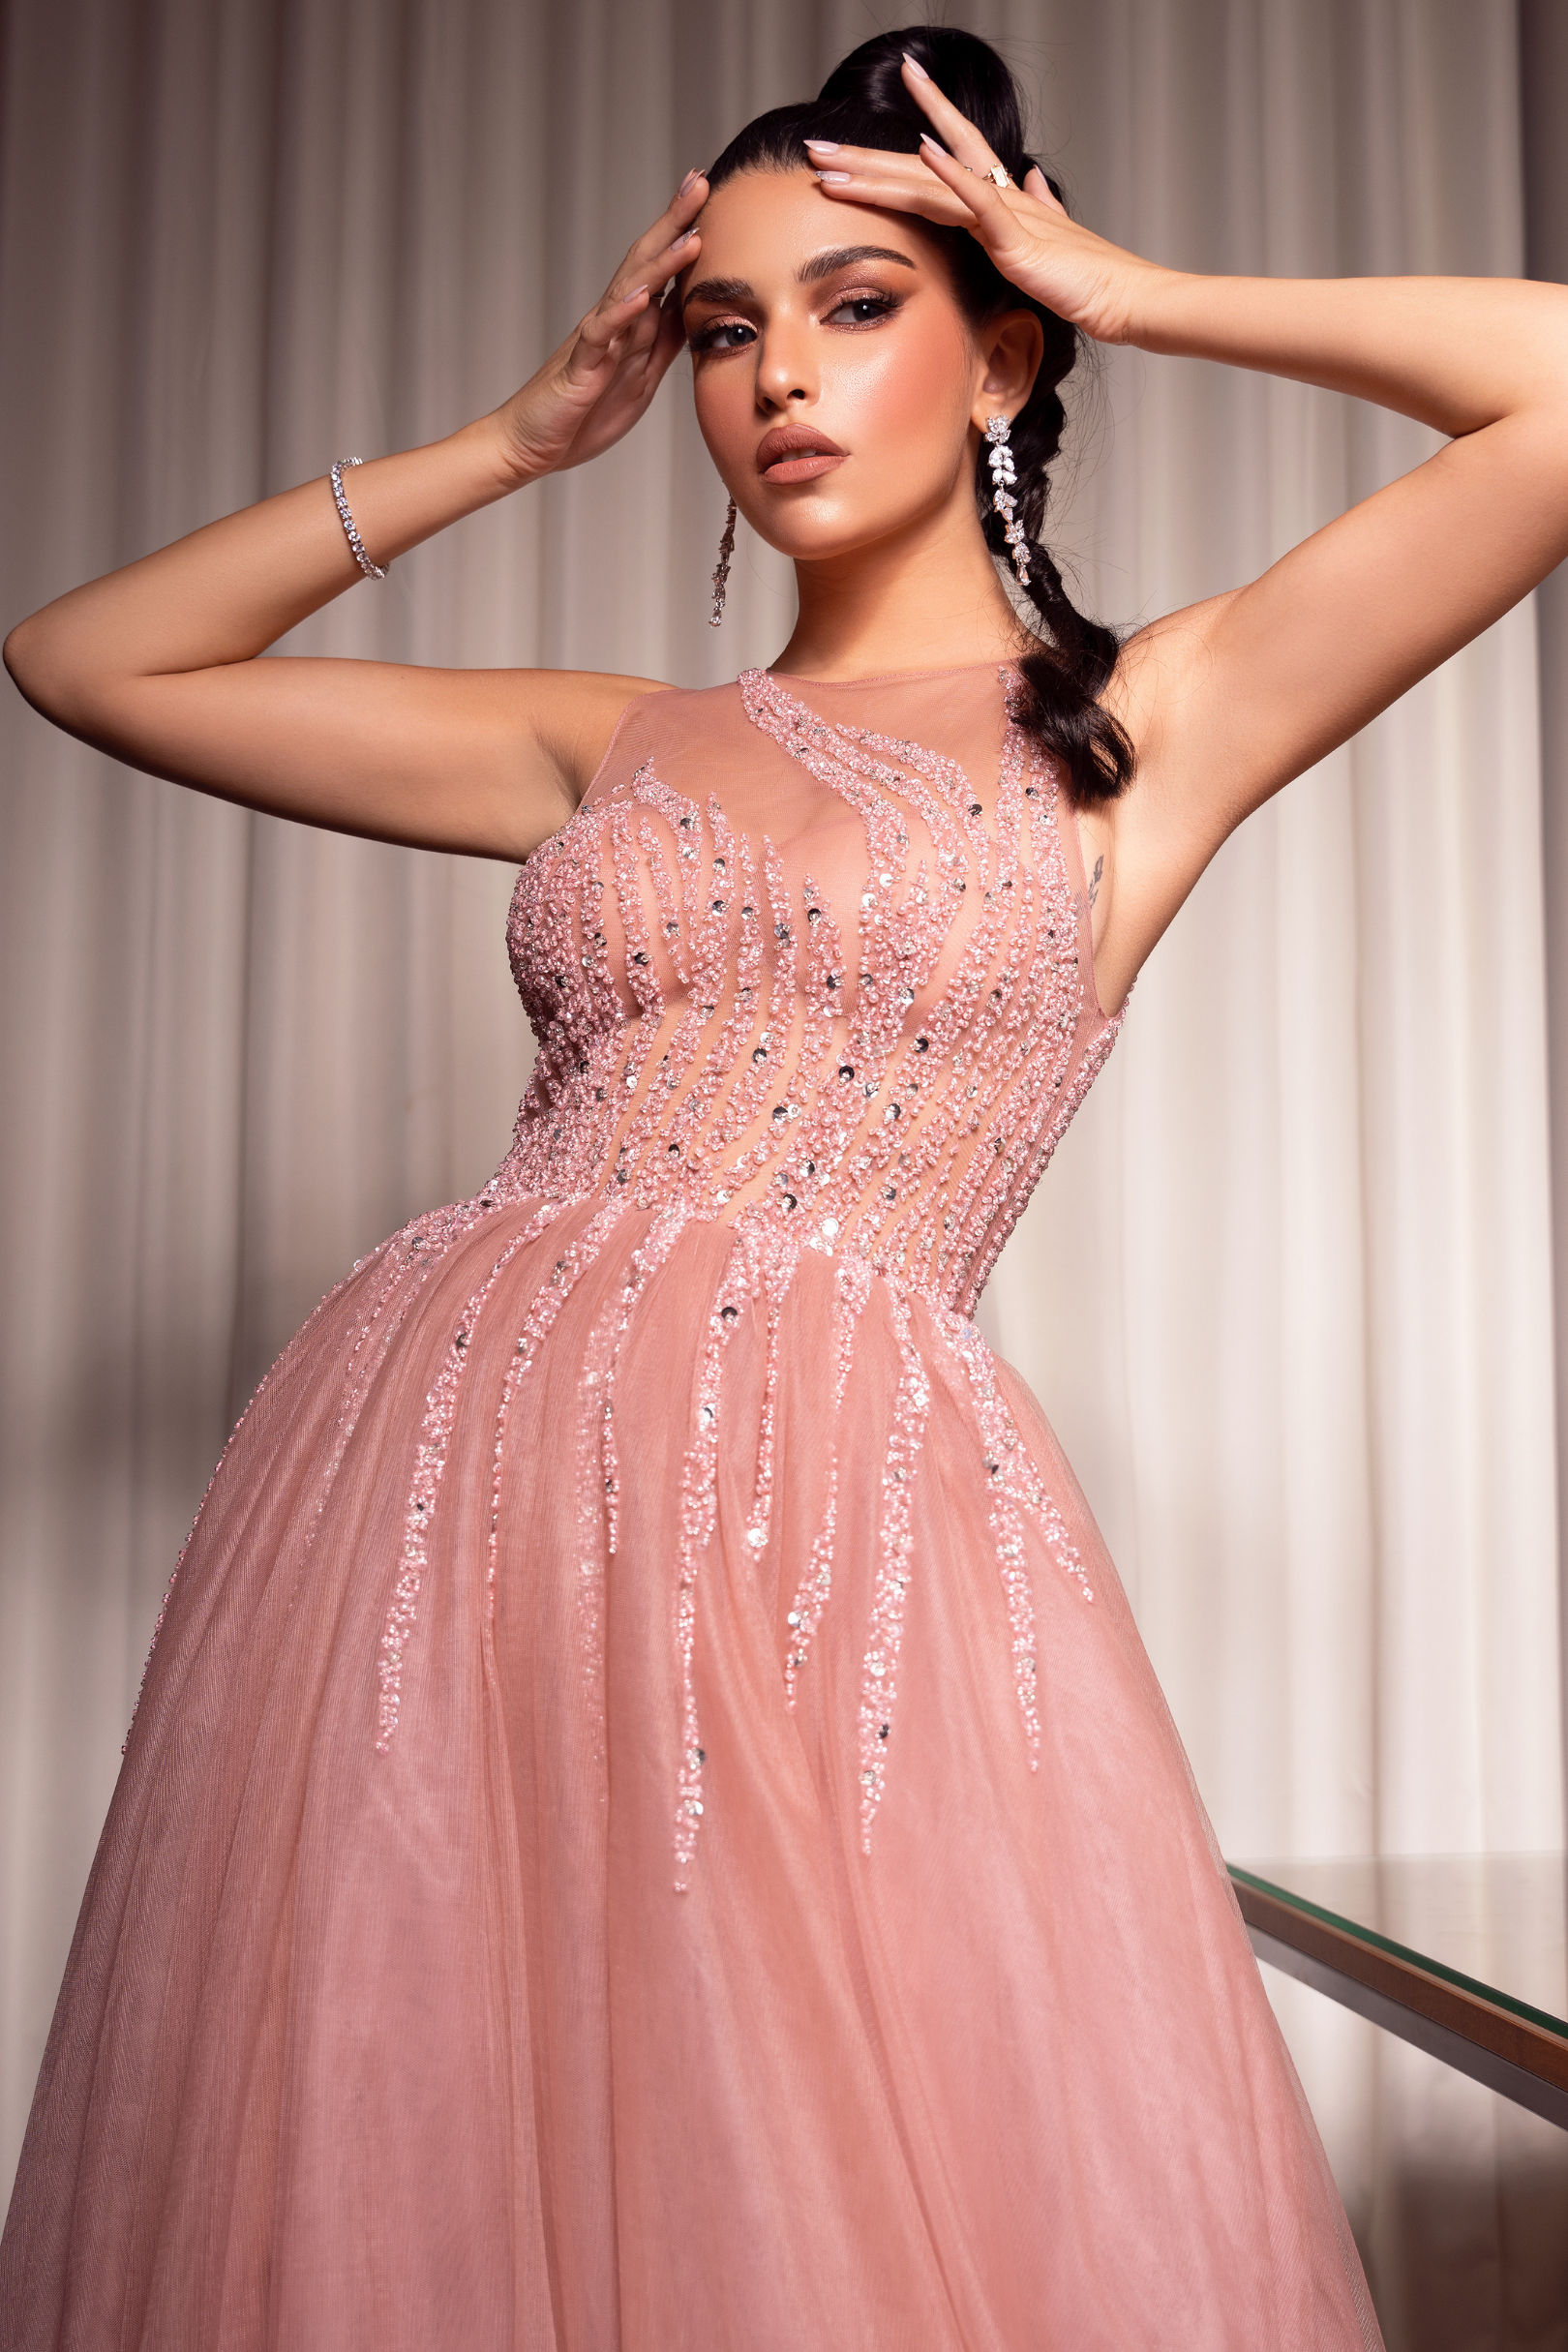 Pink evening dress with embroidered bodice and ruffles at the bottom